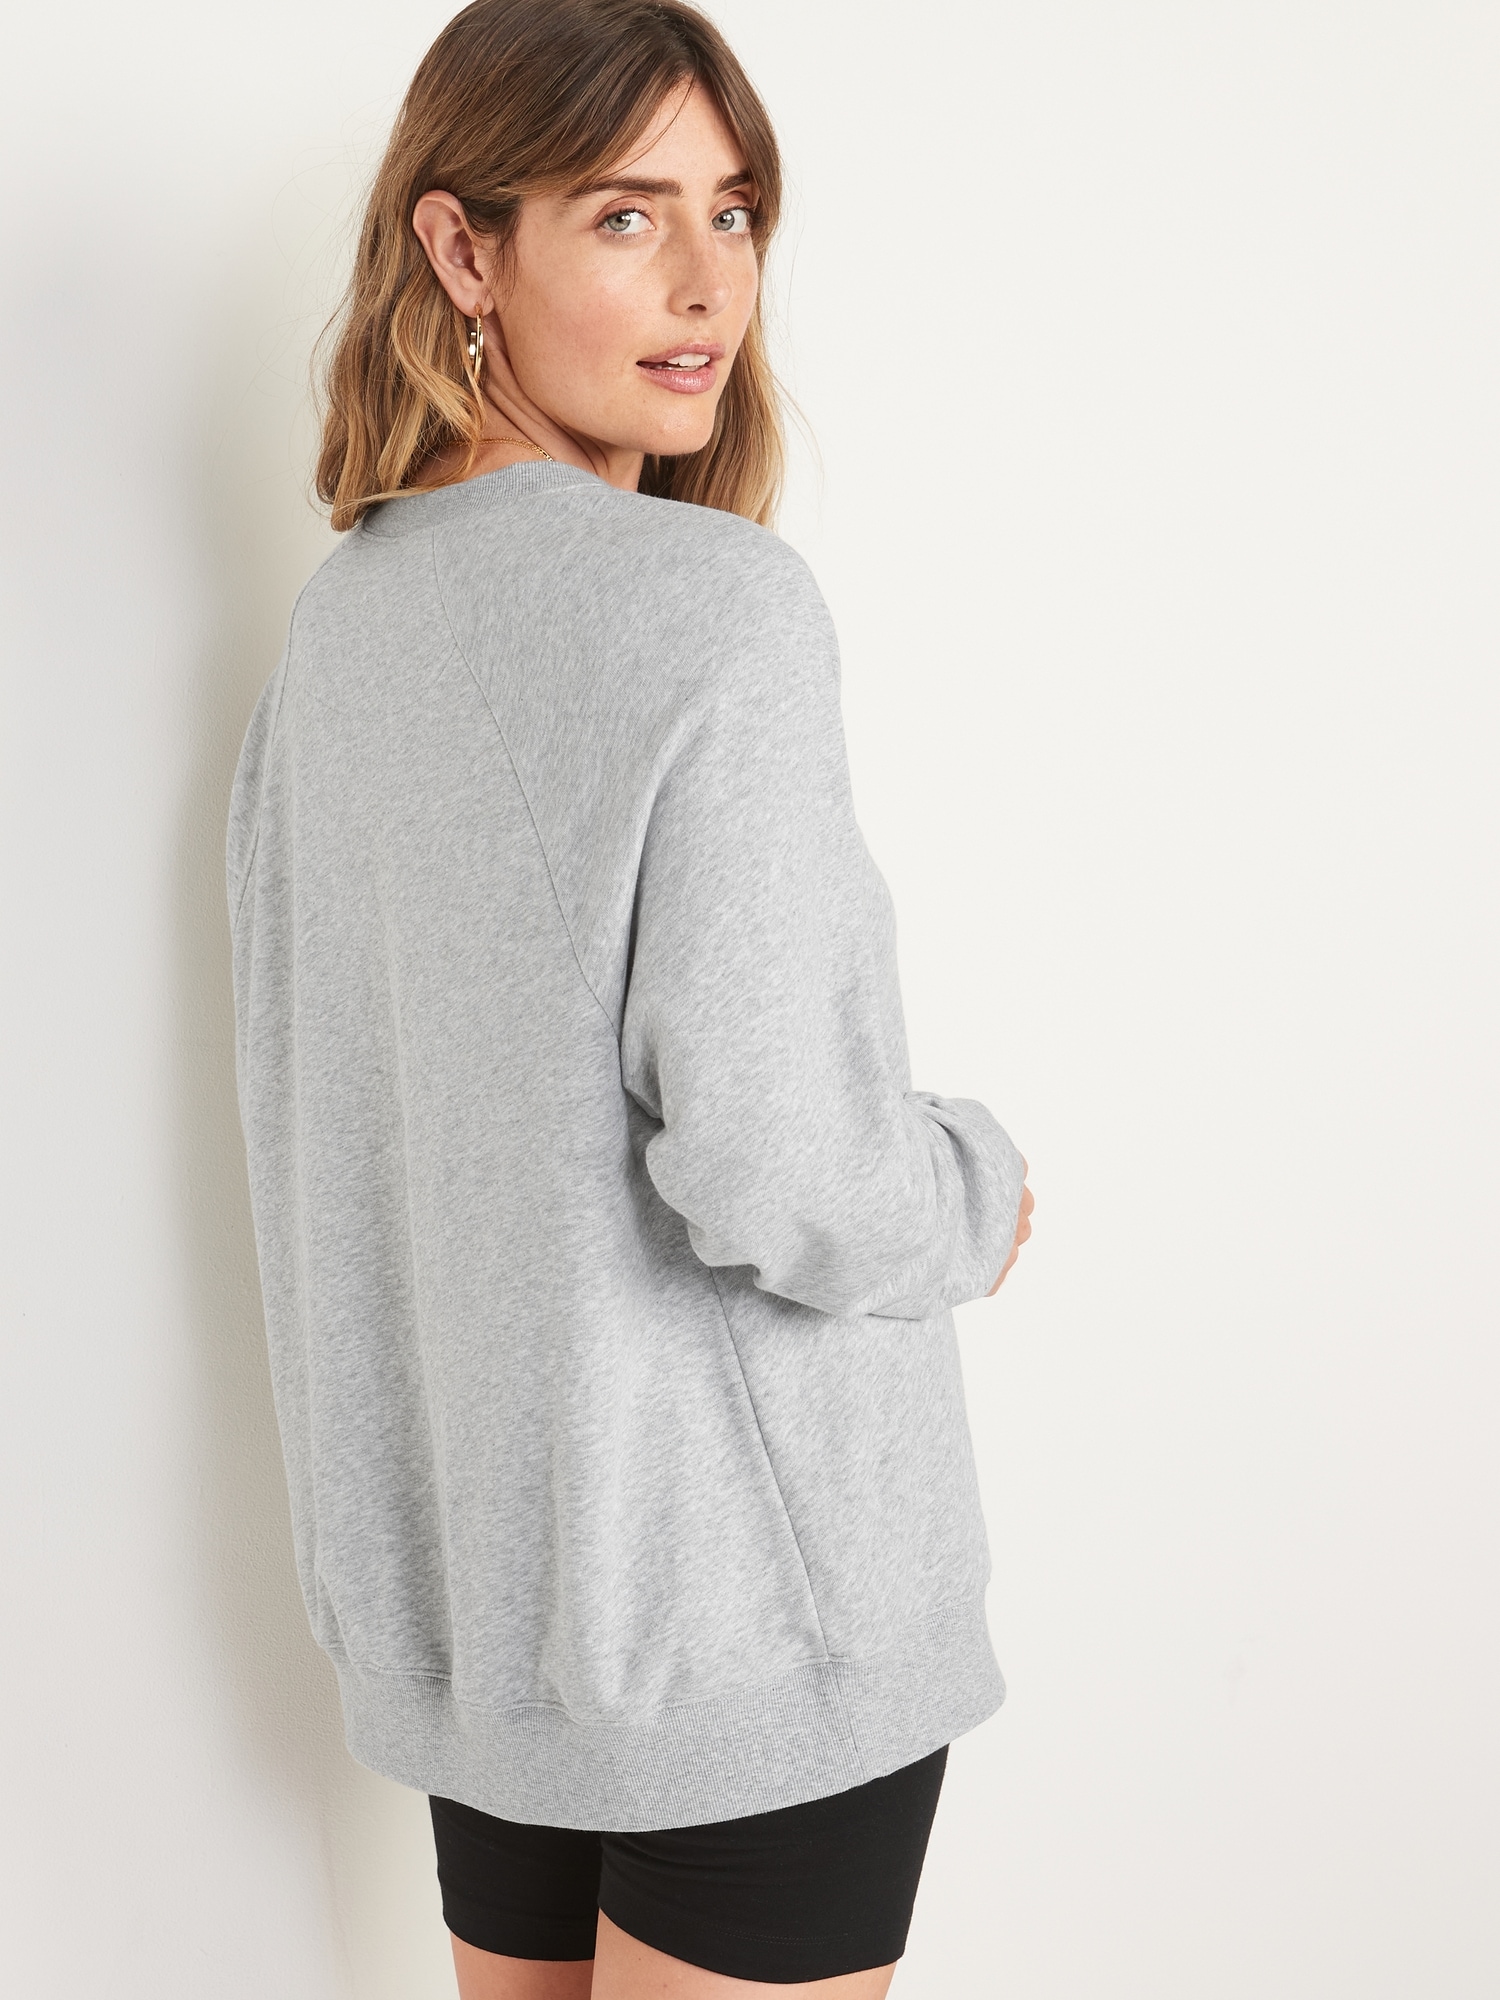 Oversized French for | Old Tunic Women Sweatshirt Navy Terry